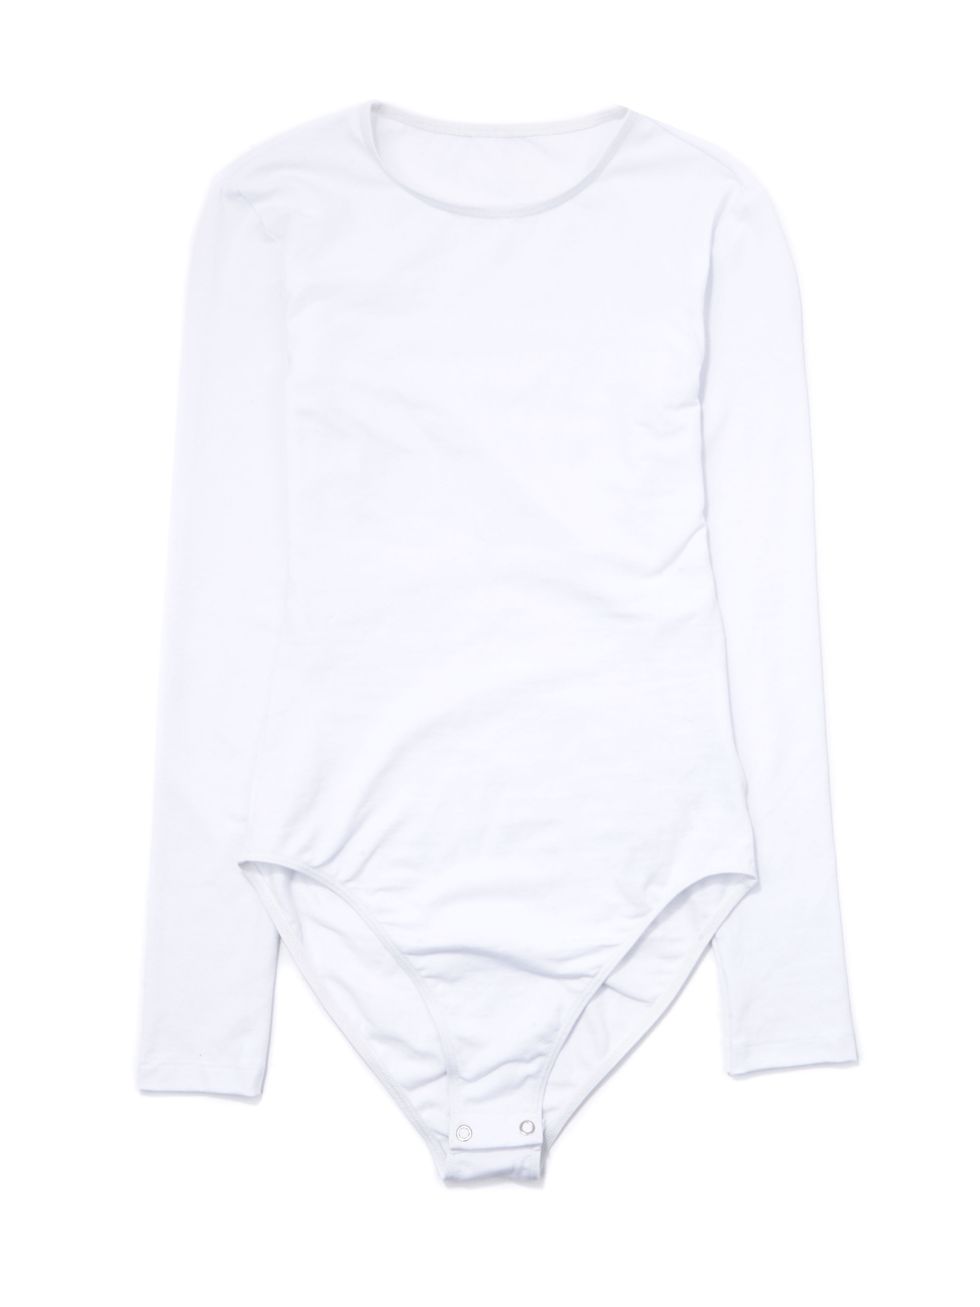 13 Bodysuits for Women That Will Replace Your T-Shirts - Best